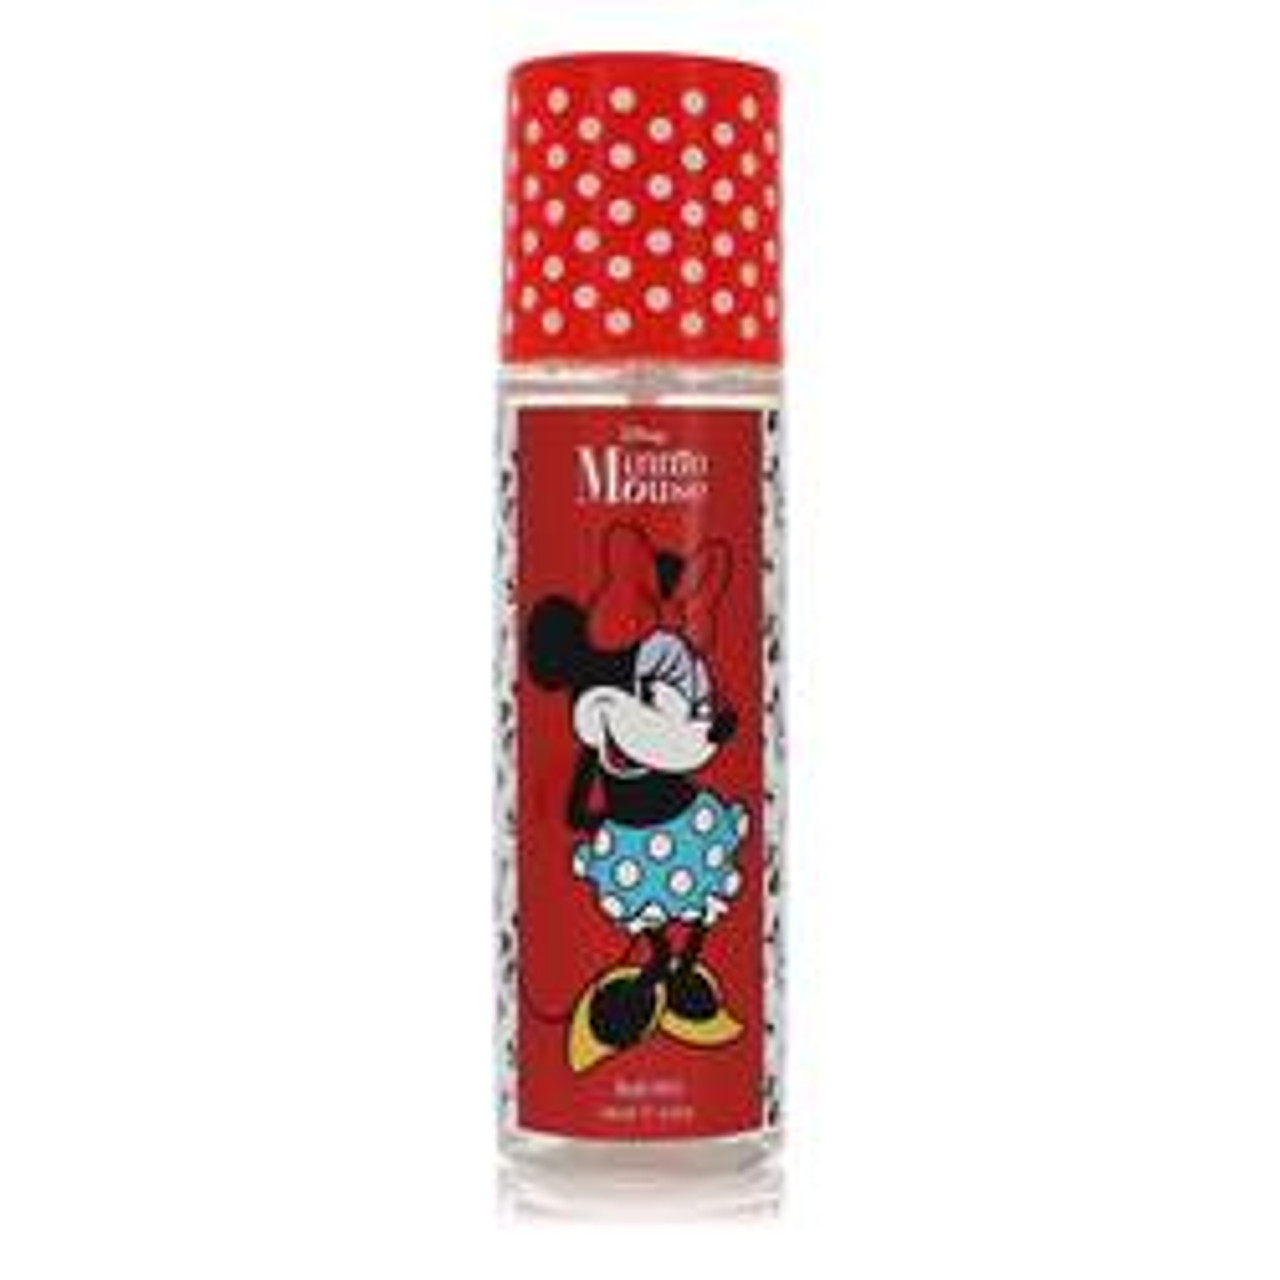 Minnie Mouse Perfume By Disney Body Mist 8 oz for Women - [From 27.00 - Choose pk Qty ] - *Ships from Miami